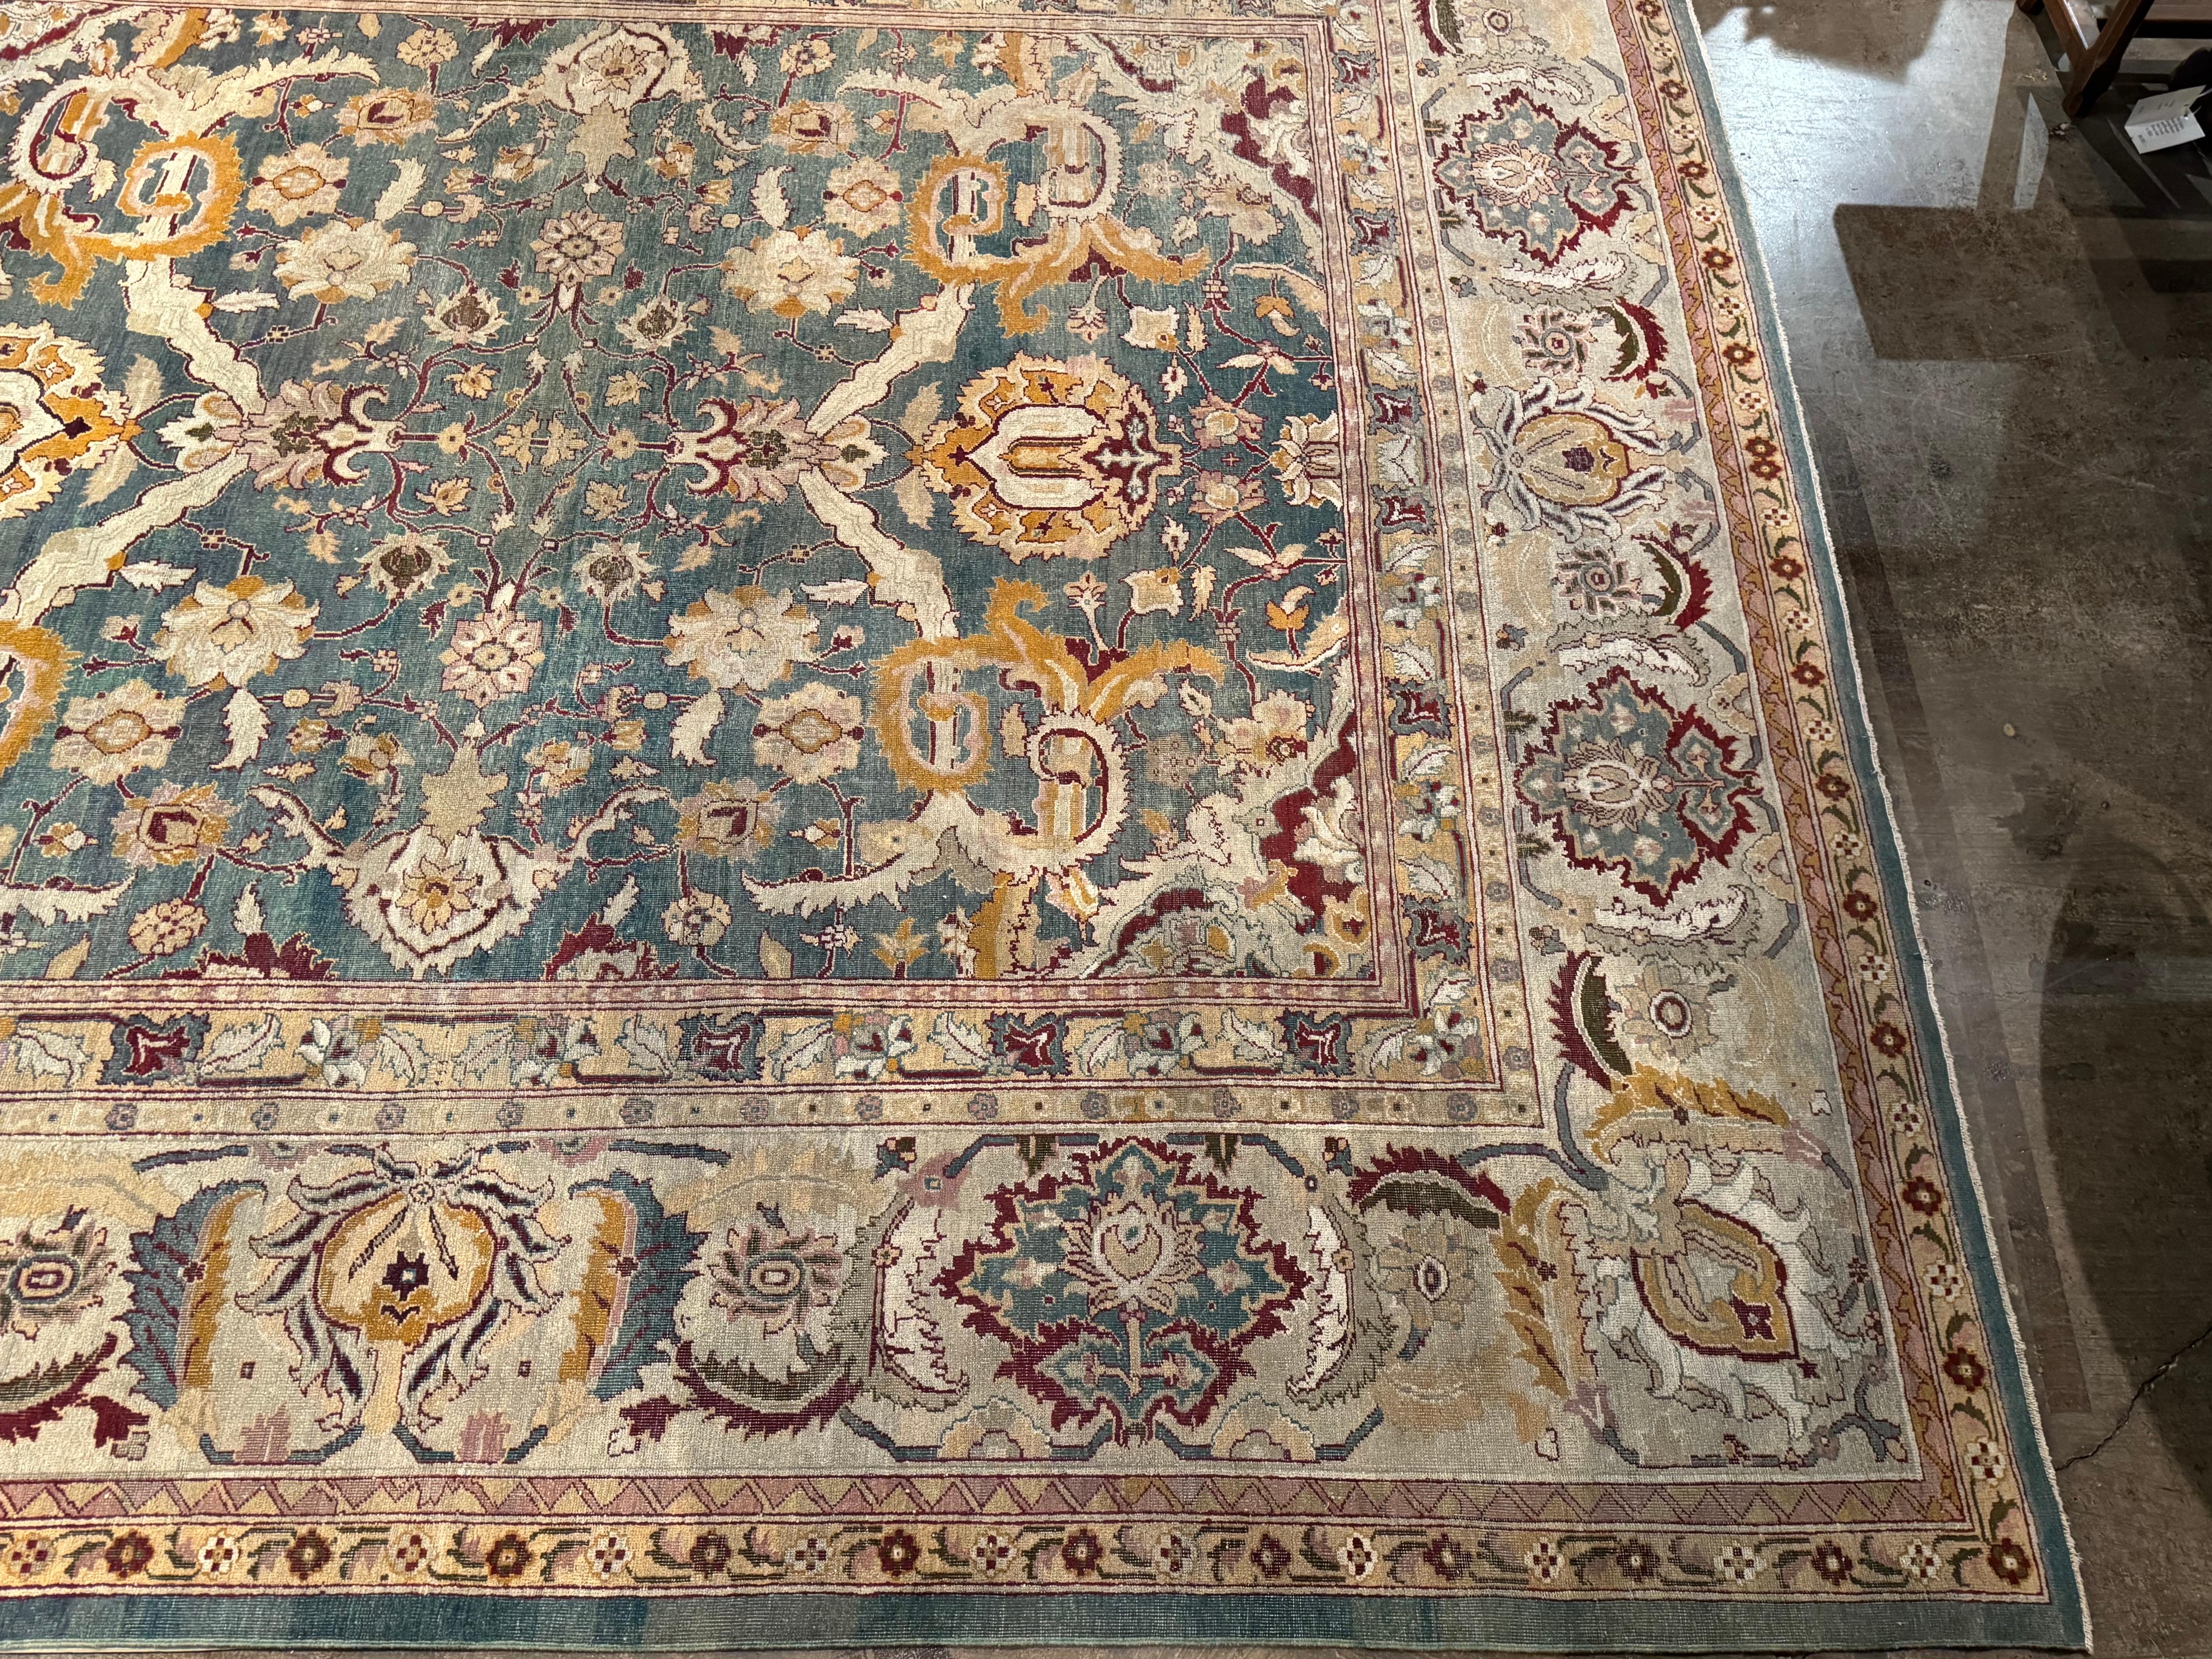 Early 20th Century Indian Hand Woven Wool Agra Rug In Excellent Condition For Sale In Dallas, TX